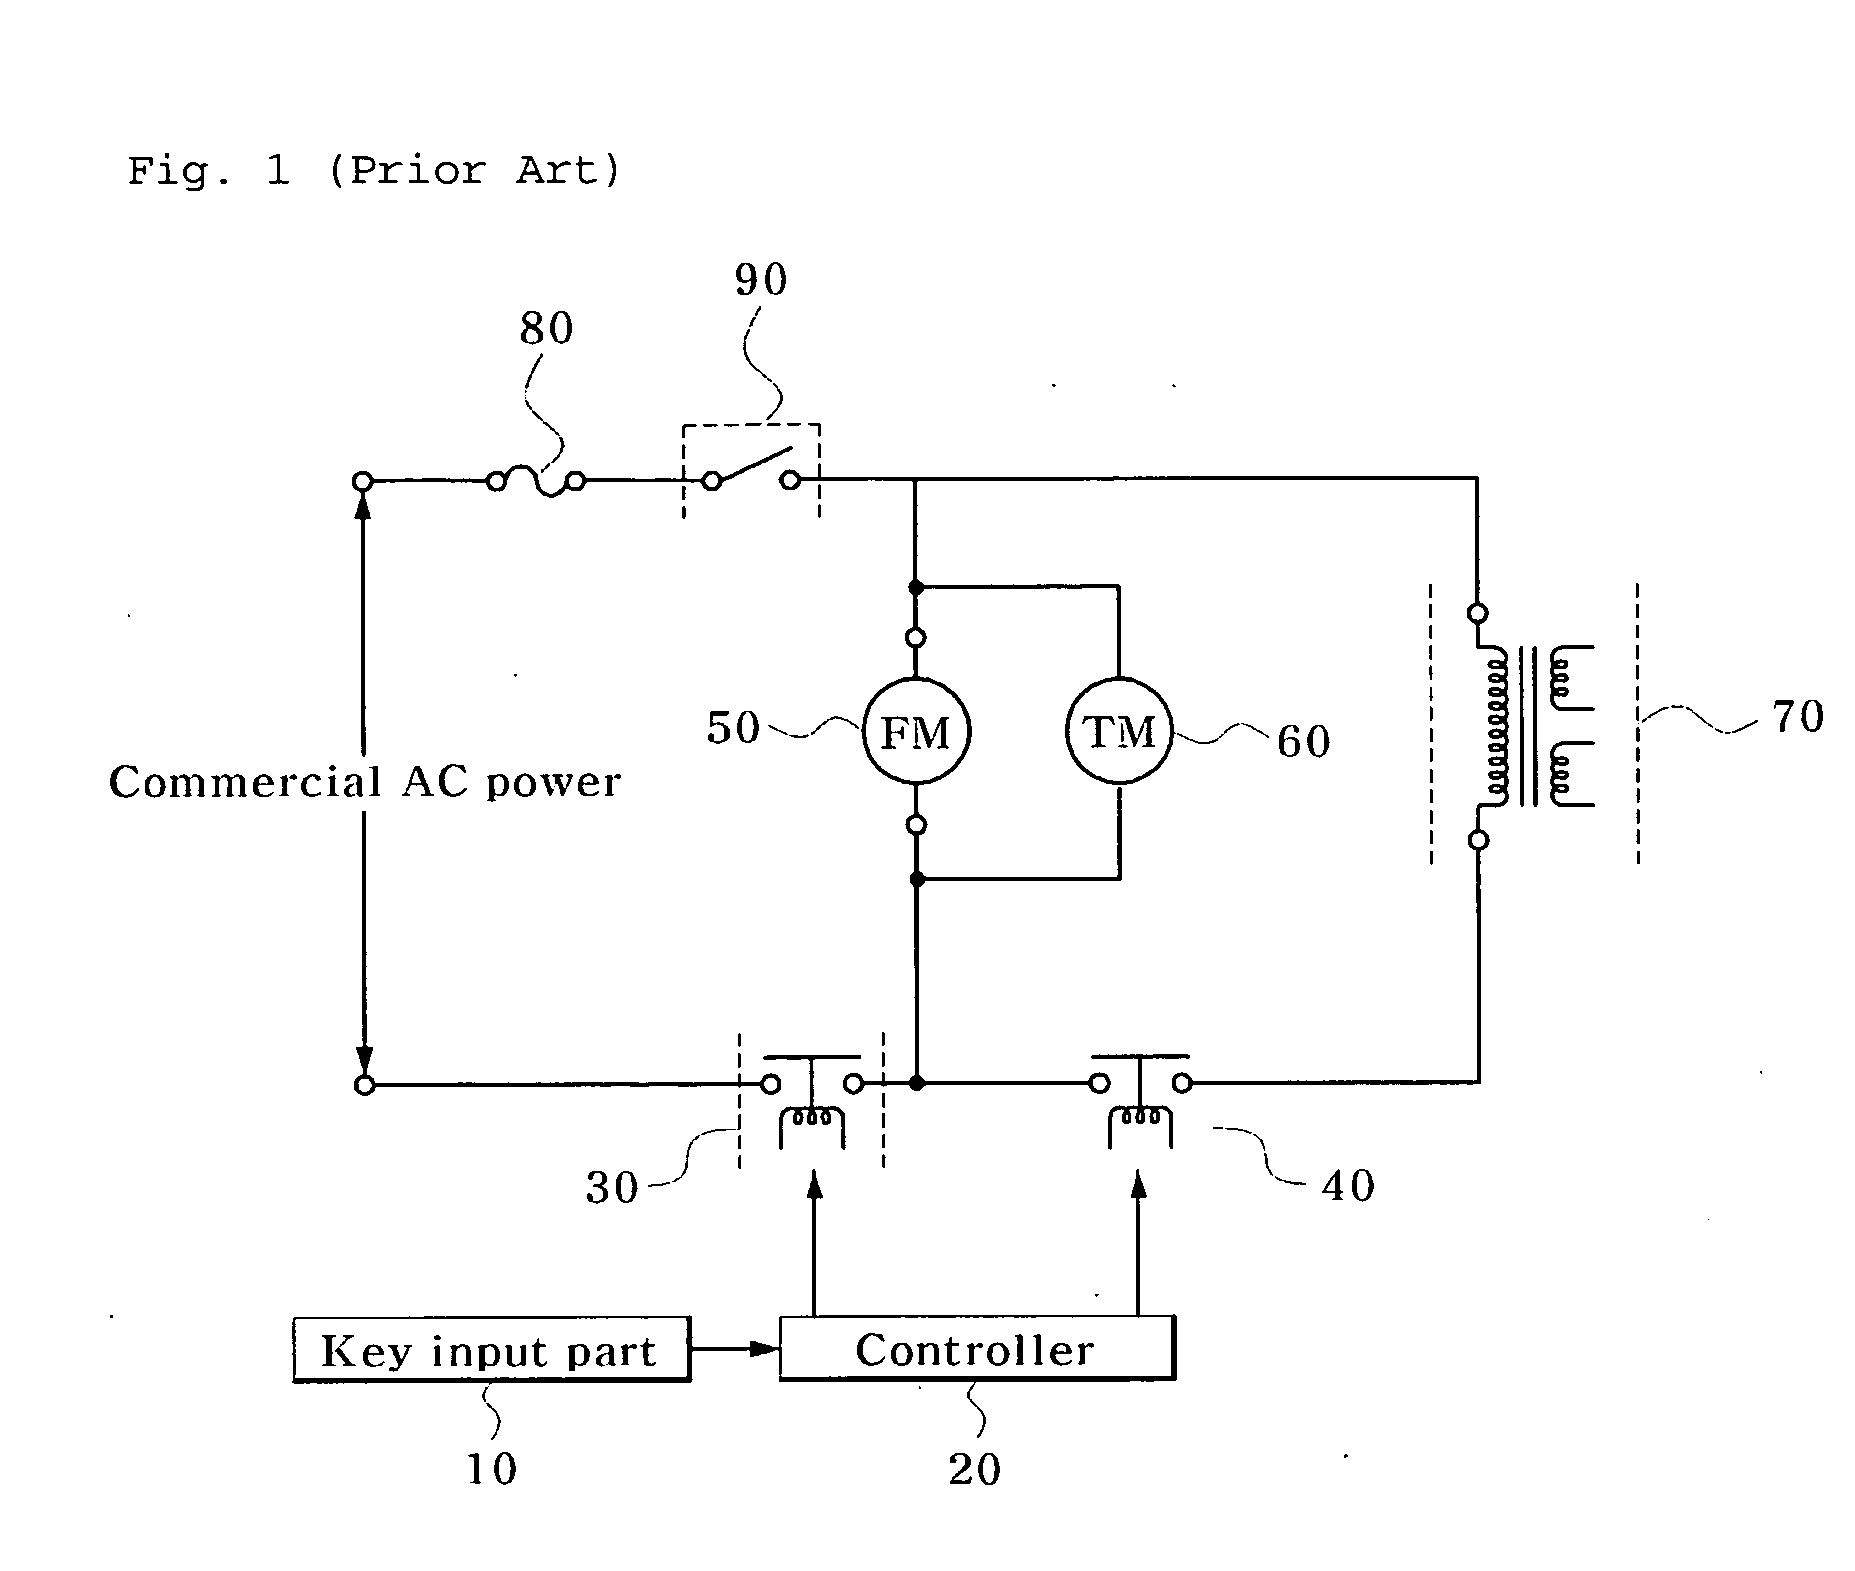 Method for preventing overheating of microwave oven